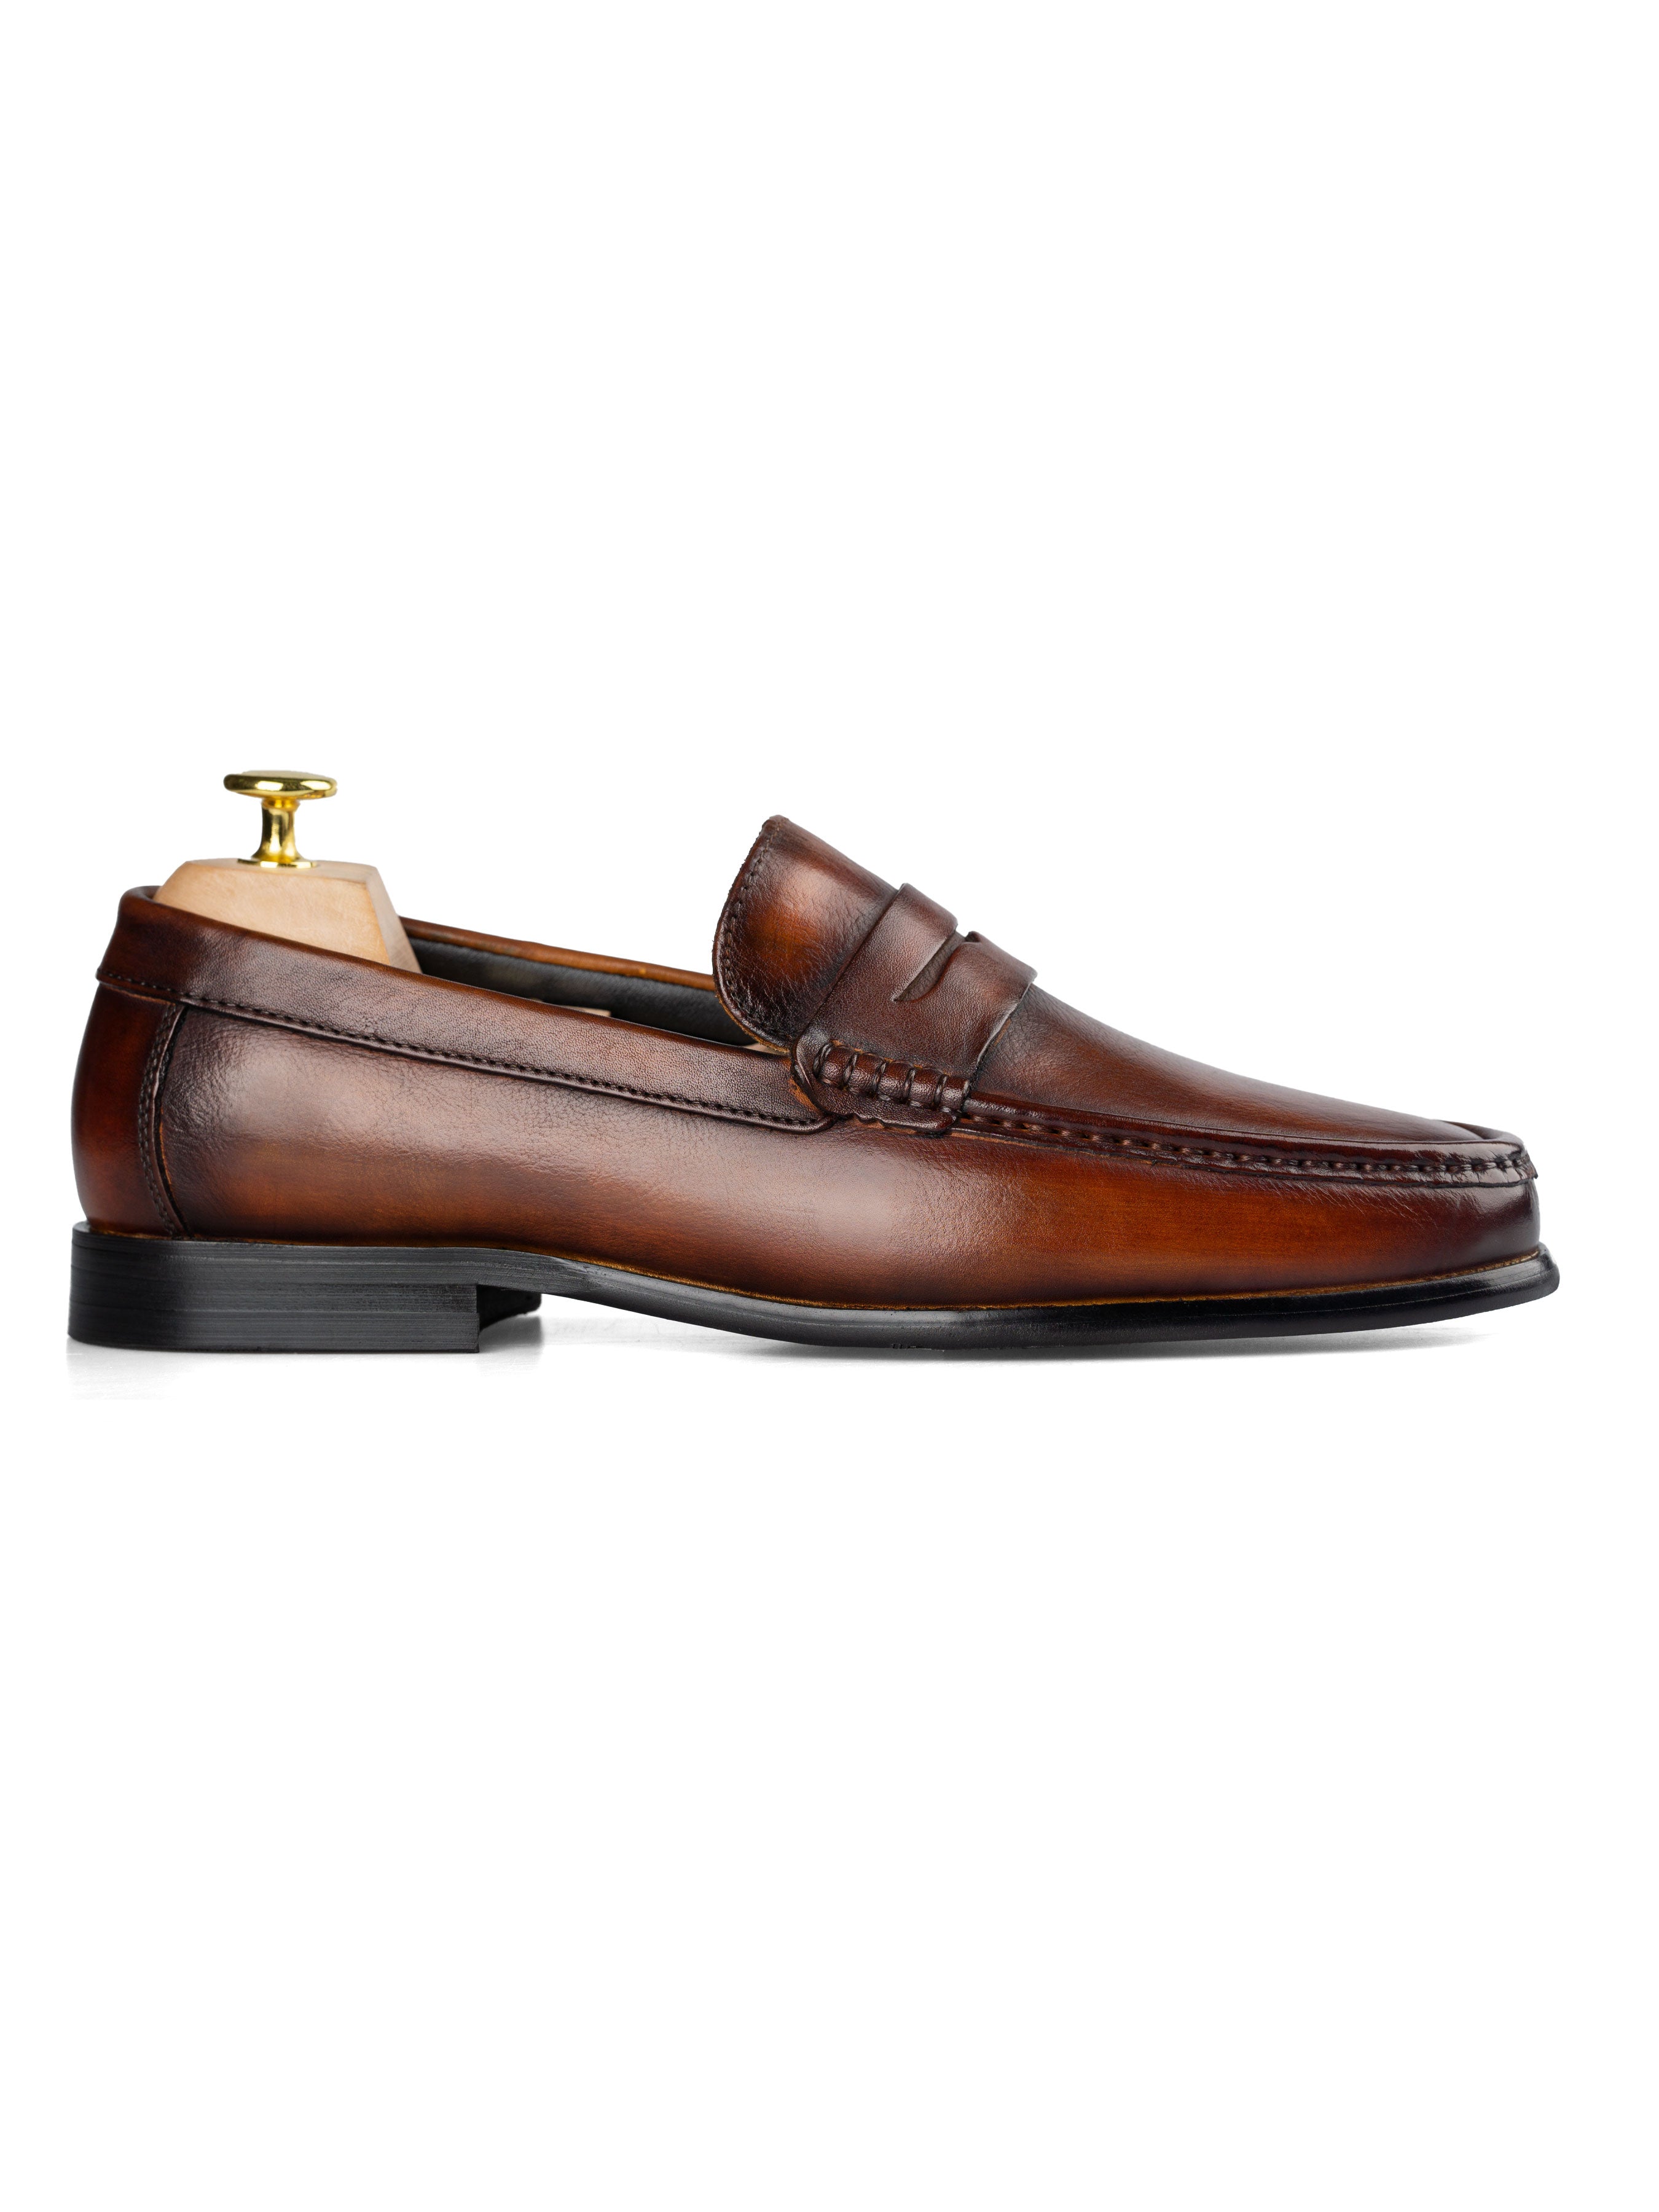 Penny Moccasin Loafer - Cognac Tan (Hand Painted Patina) - Zeve Shoes